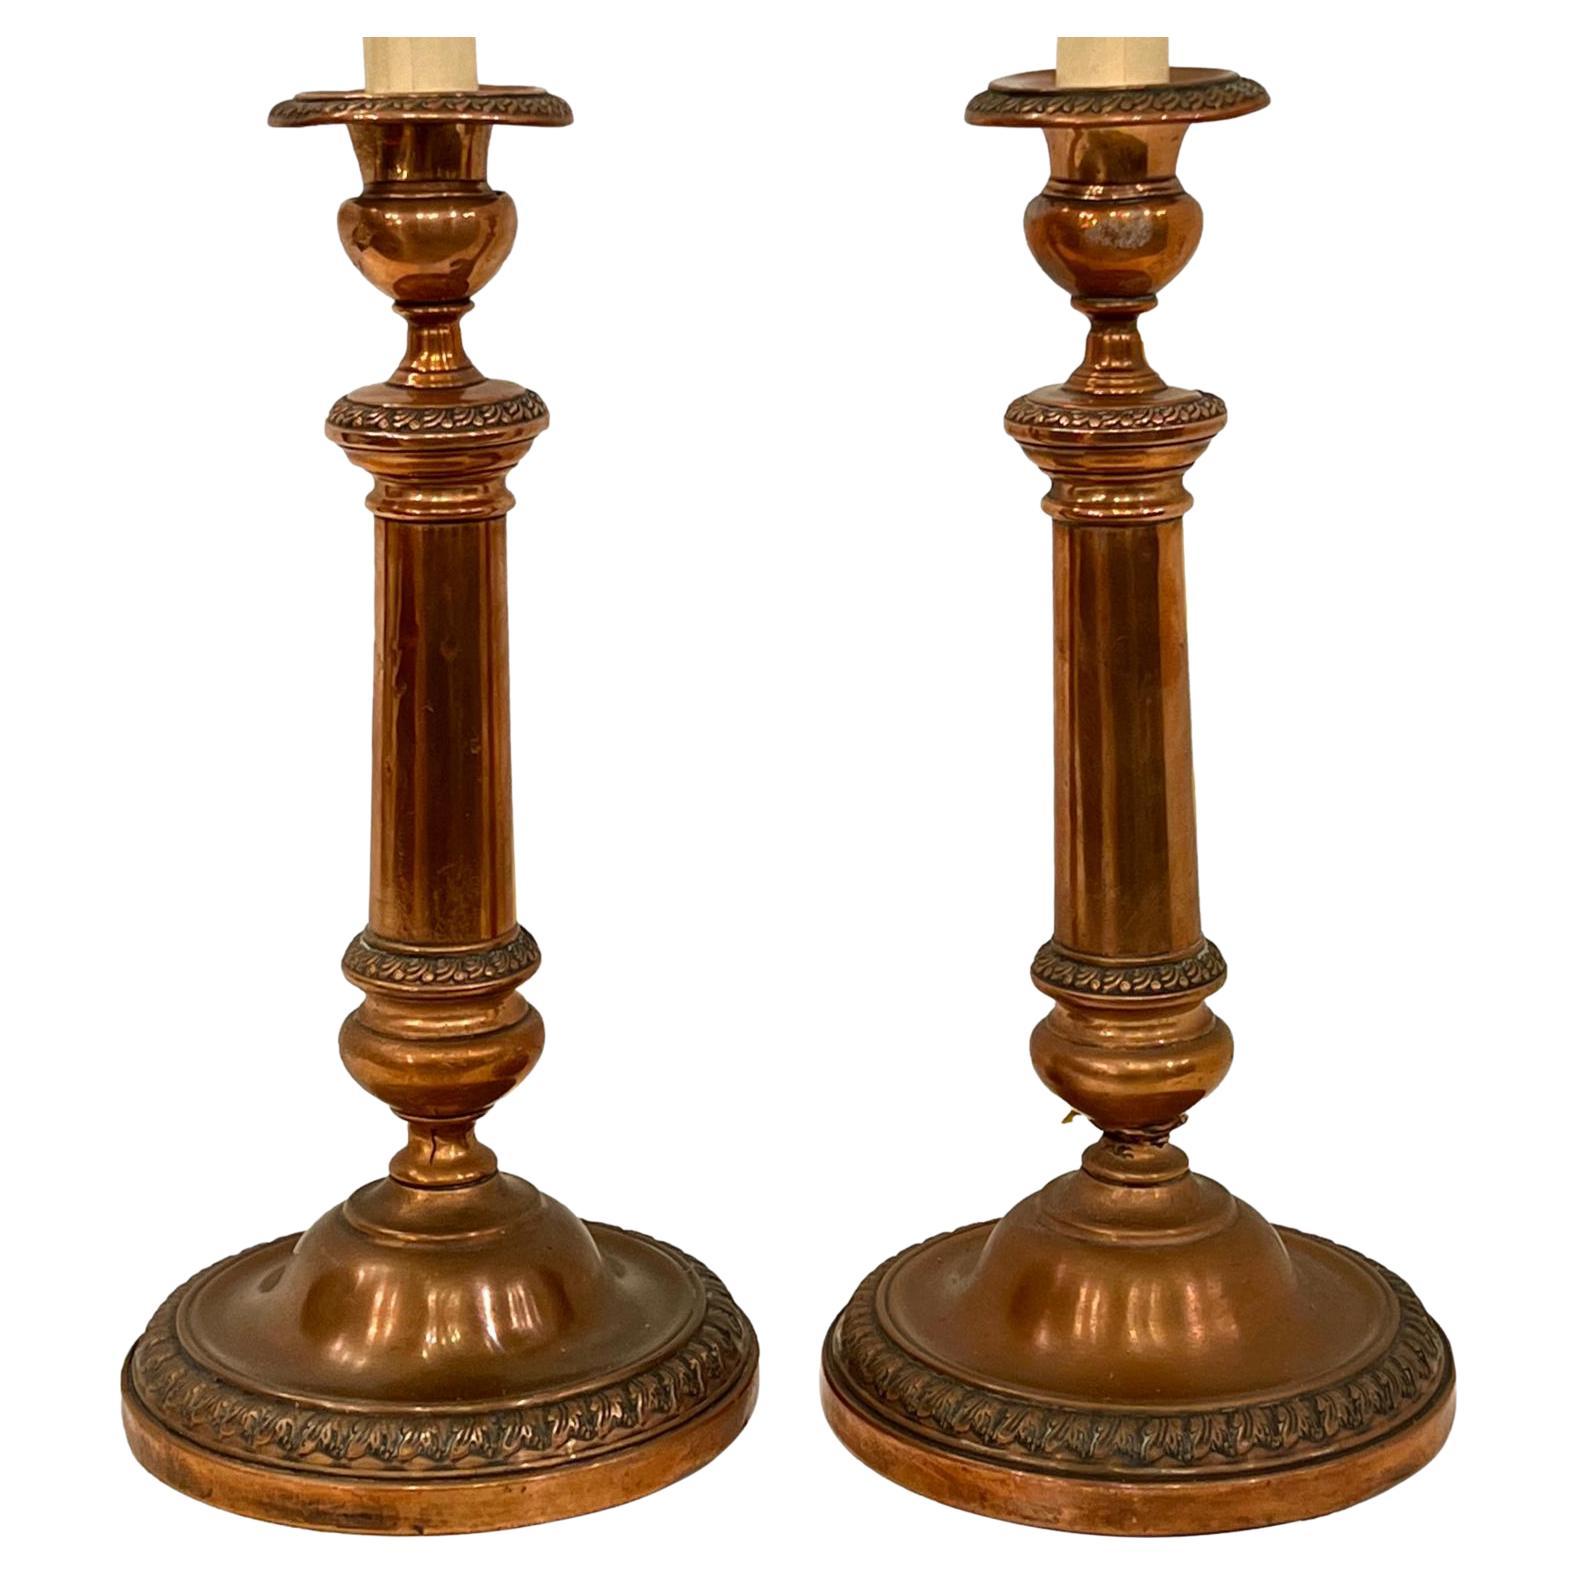 Pair of Antique Electrified Copper Candlestick Lamps For Sale